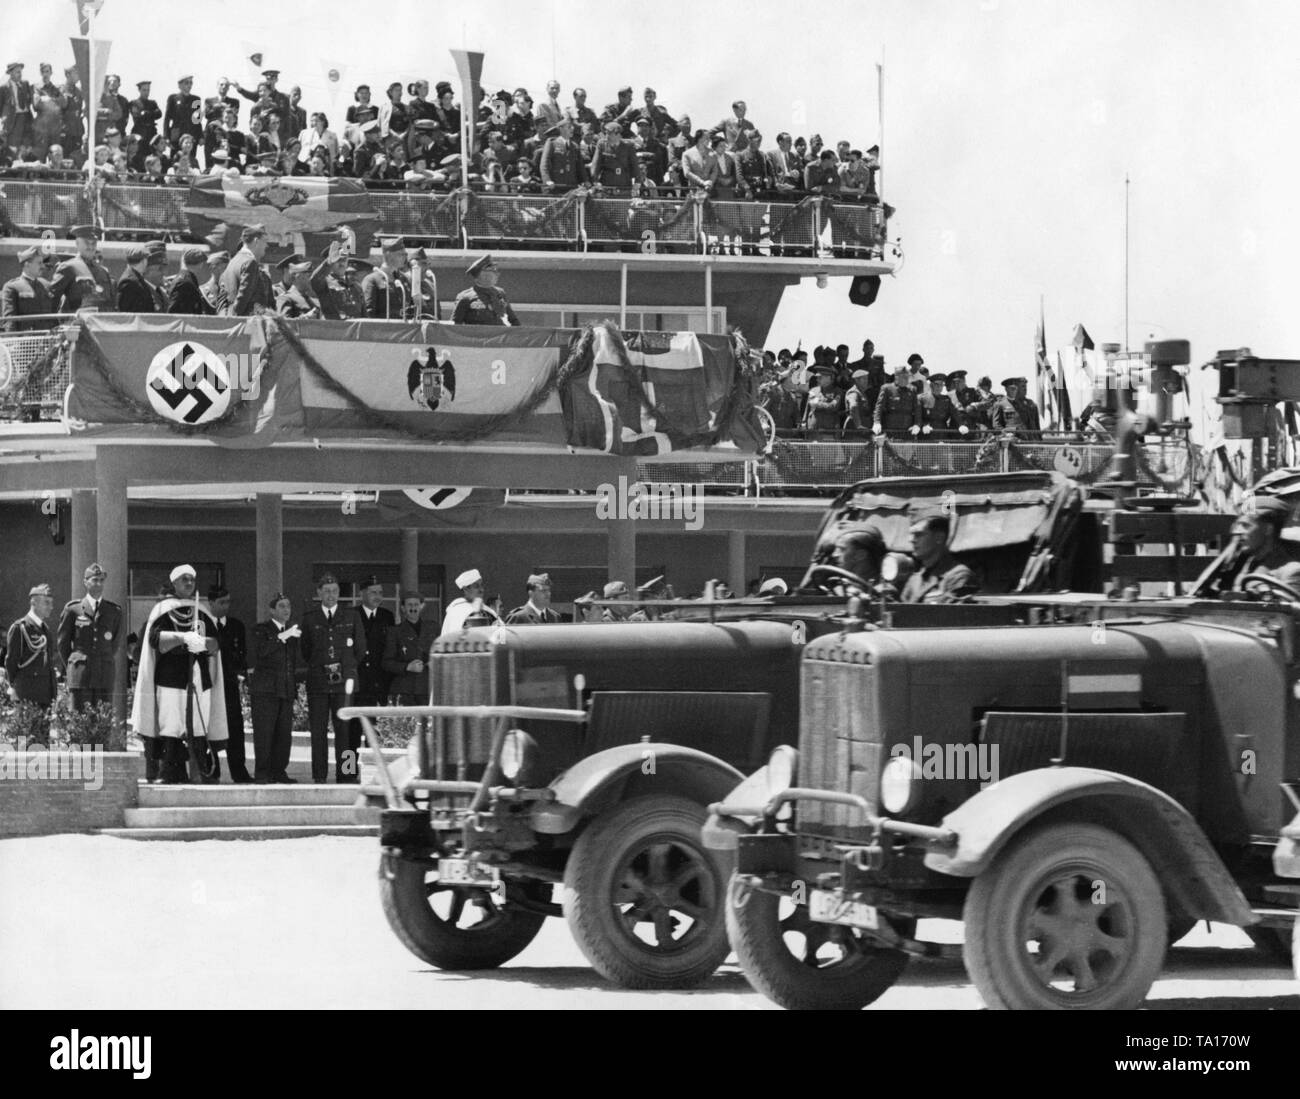 Photo of German military vehicles of the Condor Legion during a victory parade for General Francisco Franco at Madrid Barajas airport, after the invasion of the city on March 28, 1939. In the background, the terminal of the airport, which was turned into a tribune, with the VIP stand for Franco (salutes with raised arm). Beneath it, a swastika flag and the tricolor (flag of the Kingdom of Italy) are hanging next to the Spanish Bandera. Stock Photo